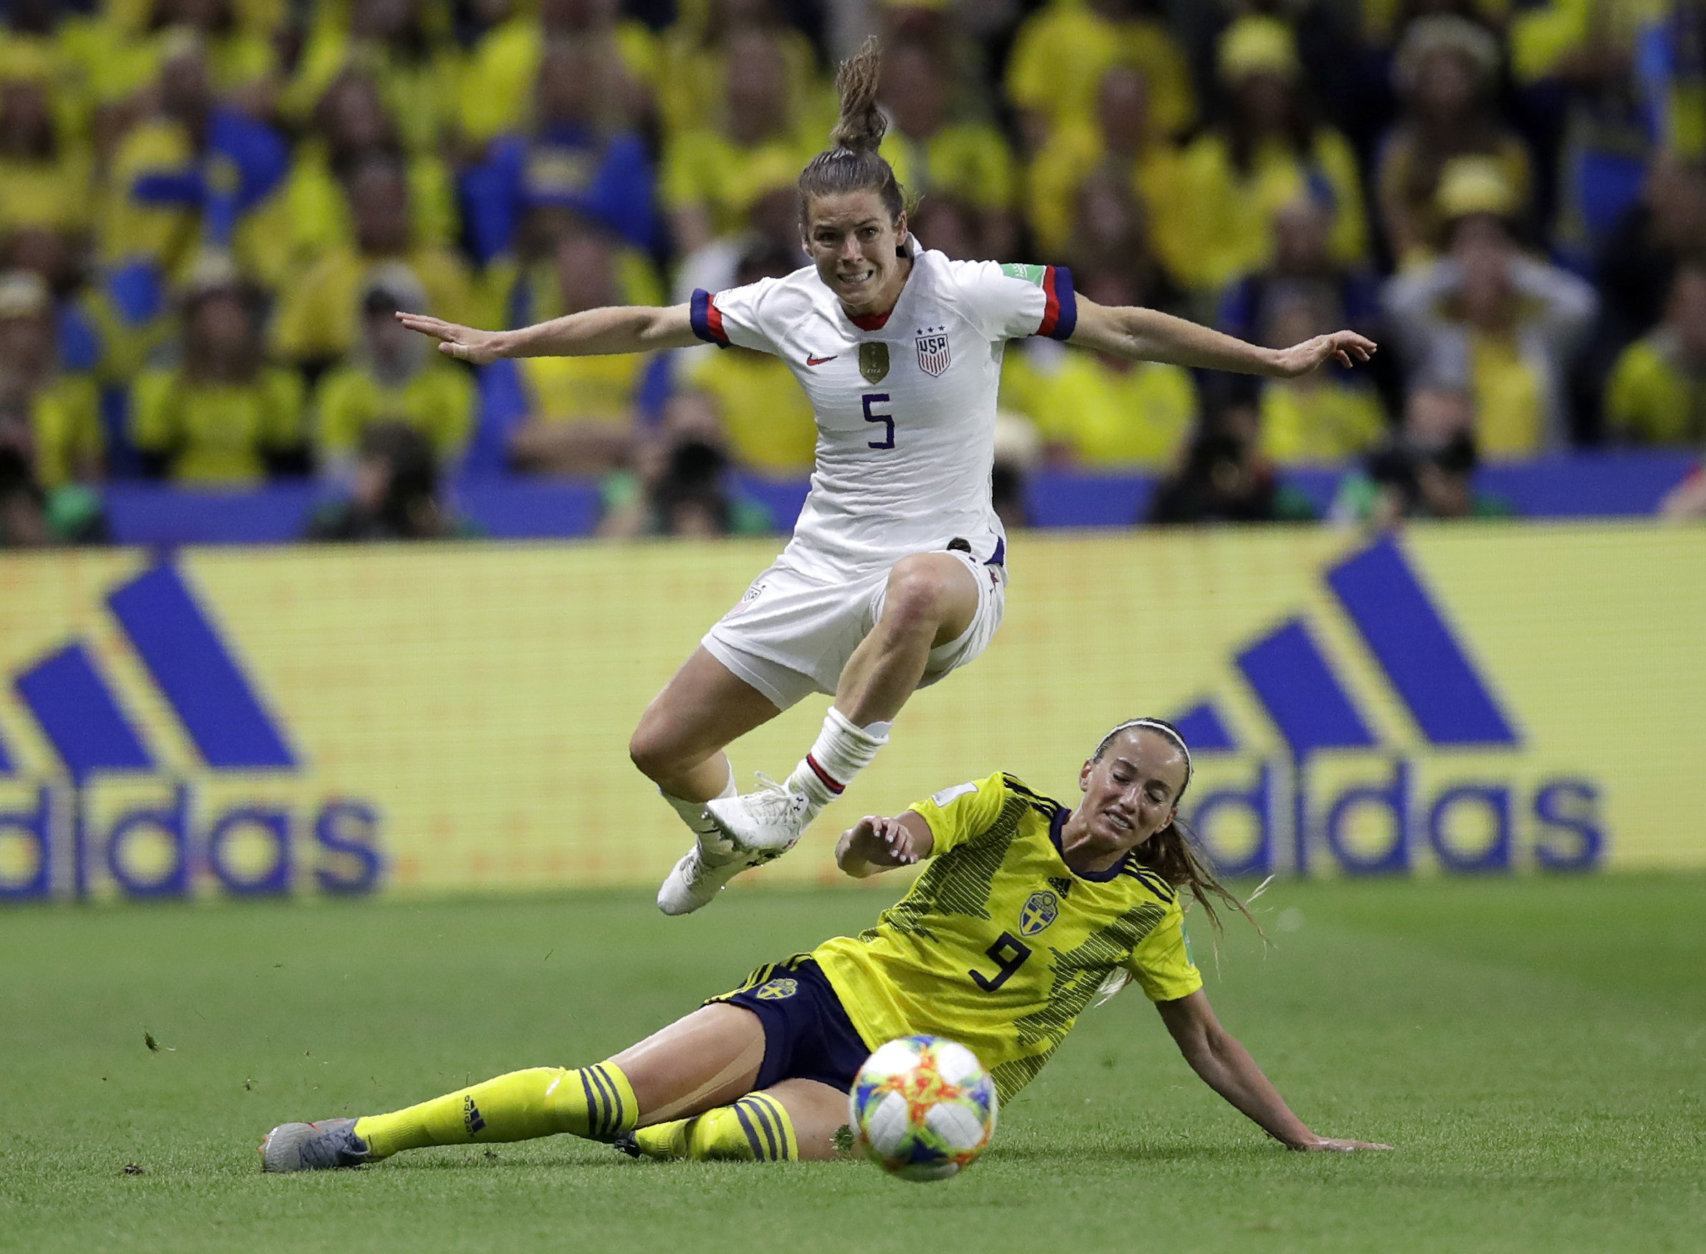 United States' Kelley O Hara leaps over Sweden's Kosovare Asllani during the Women's World Cup Group F soccer match between Sweden and the United States at Stade Océane, in Le Havre, France, Thursday, June 20, 2019. (AP Photo/Alessandra Tarantino)